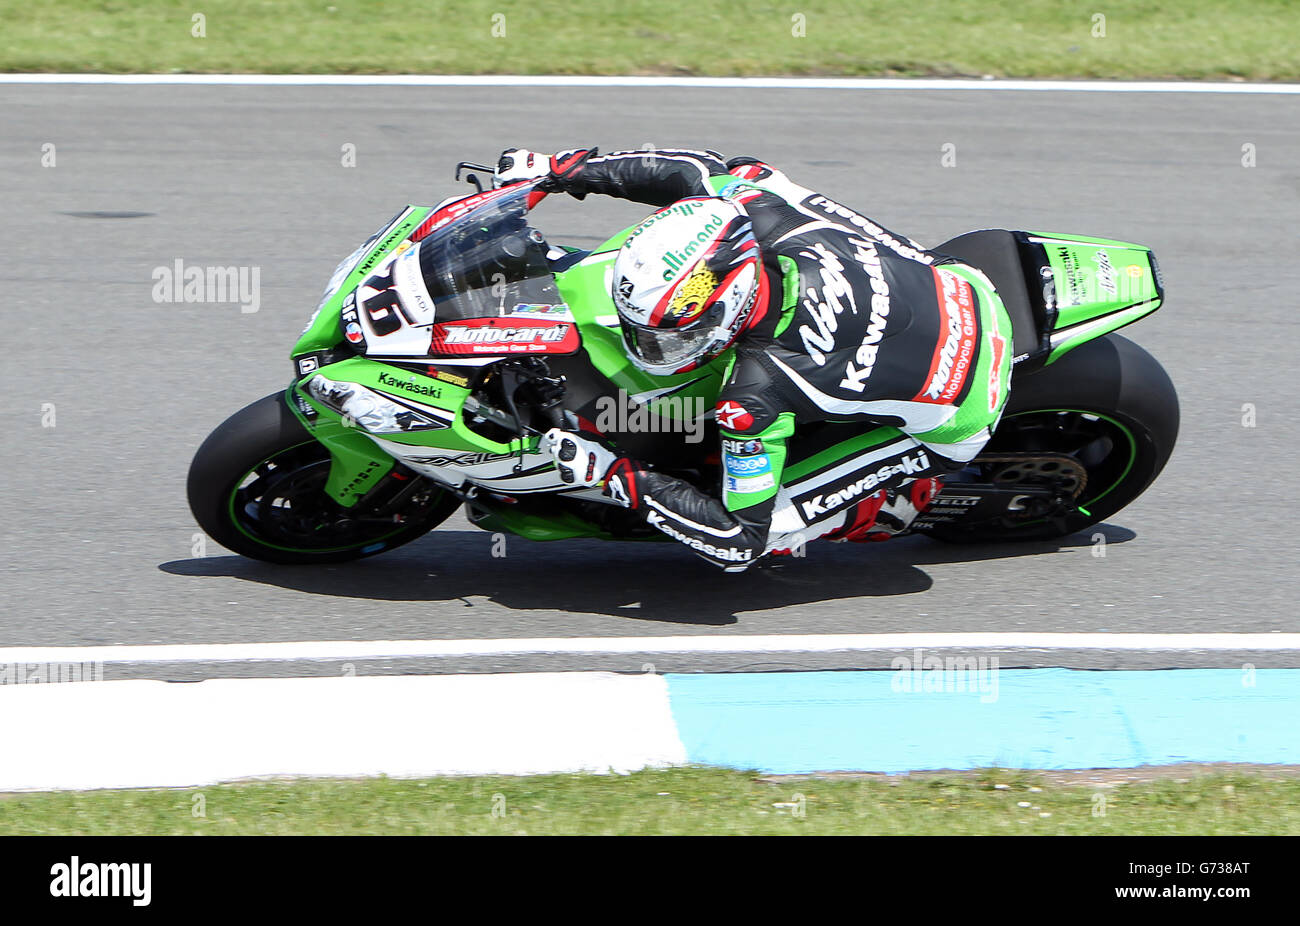 Motor Racing - Superbike FIM World Championship - Round Five - Race Day - Donington Park. Kawasaki ZX-10R's Loris Baz during race two of round 5 of the Superbikes FIM World Championship at Donington Park, Donington. Stock Photo